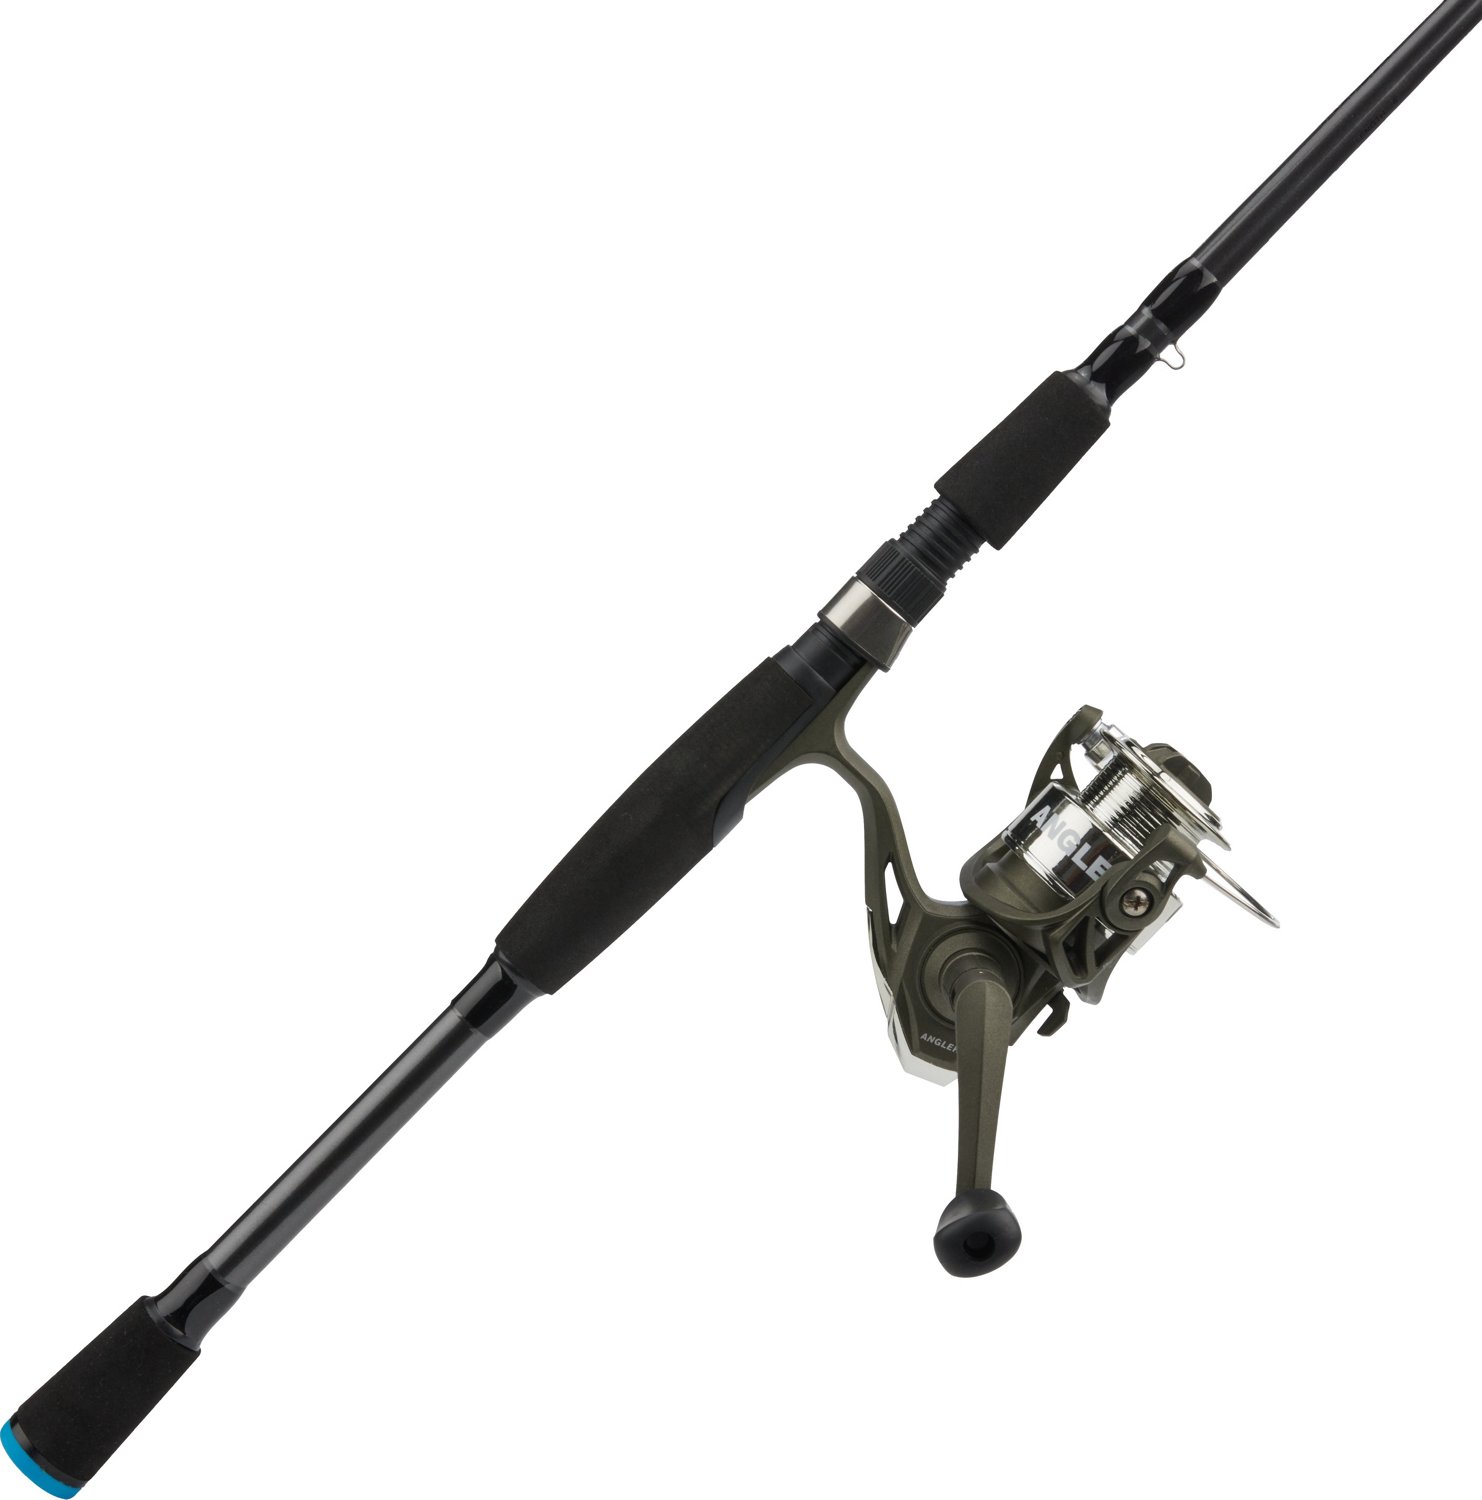  Breakaway Tackle Cannon : Spinning Rod And Reel Combos :  Sports & Outdoors